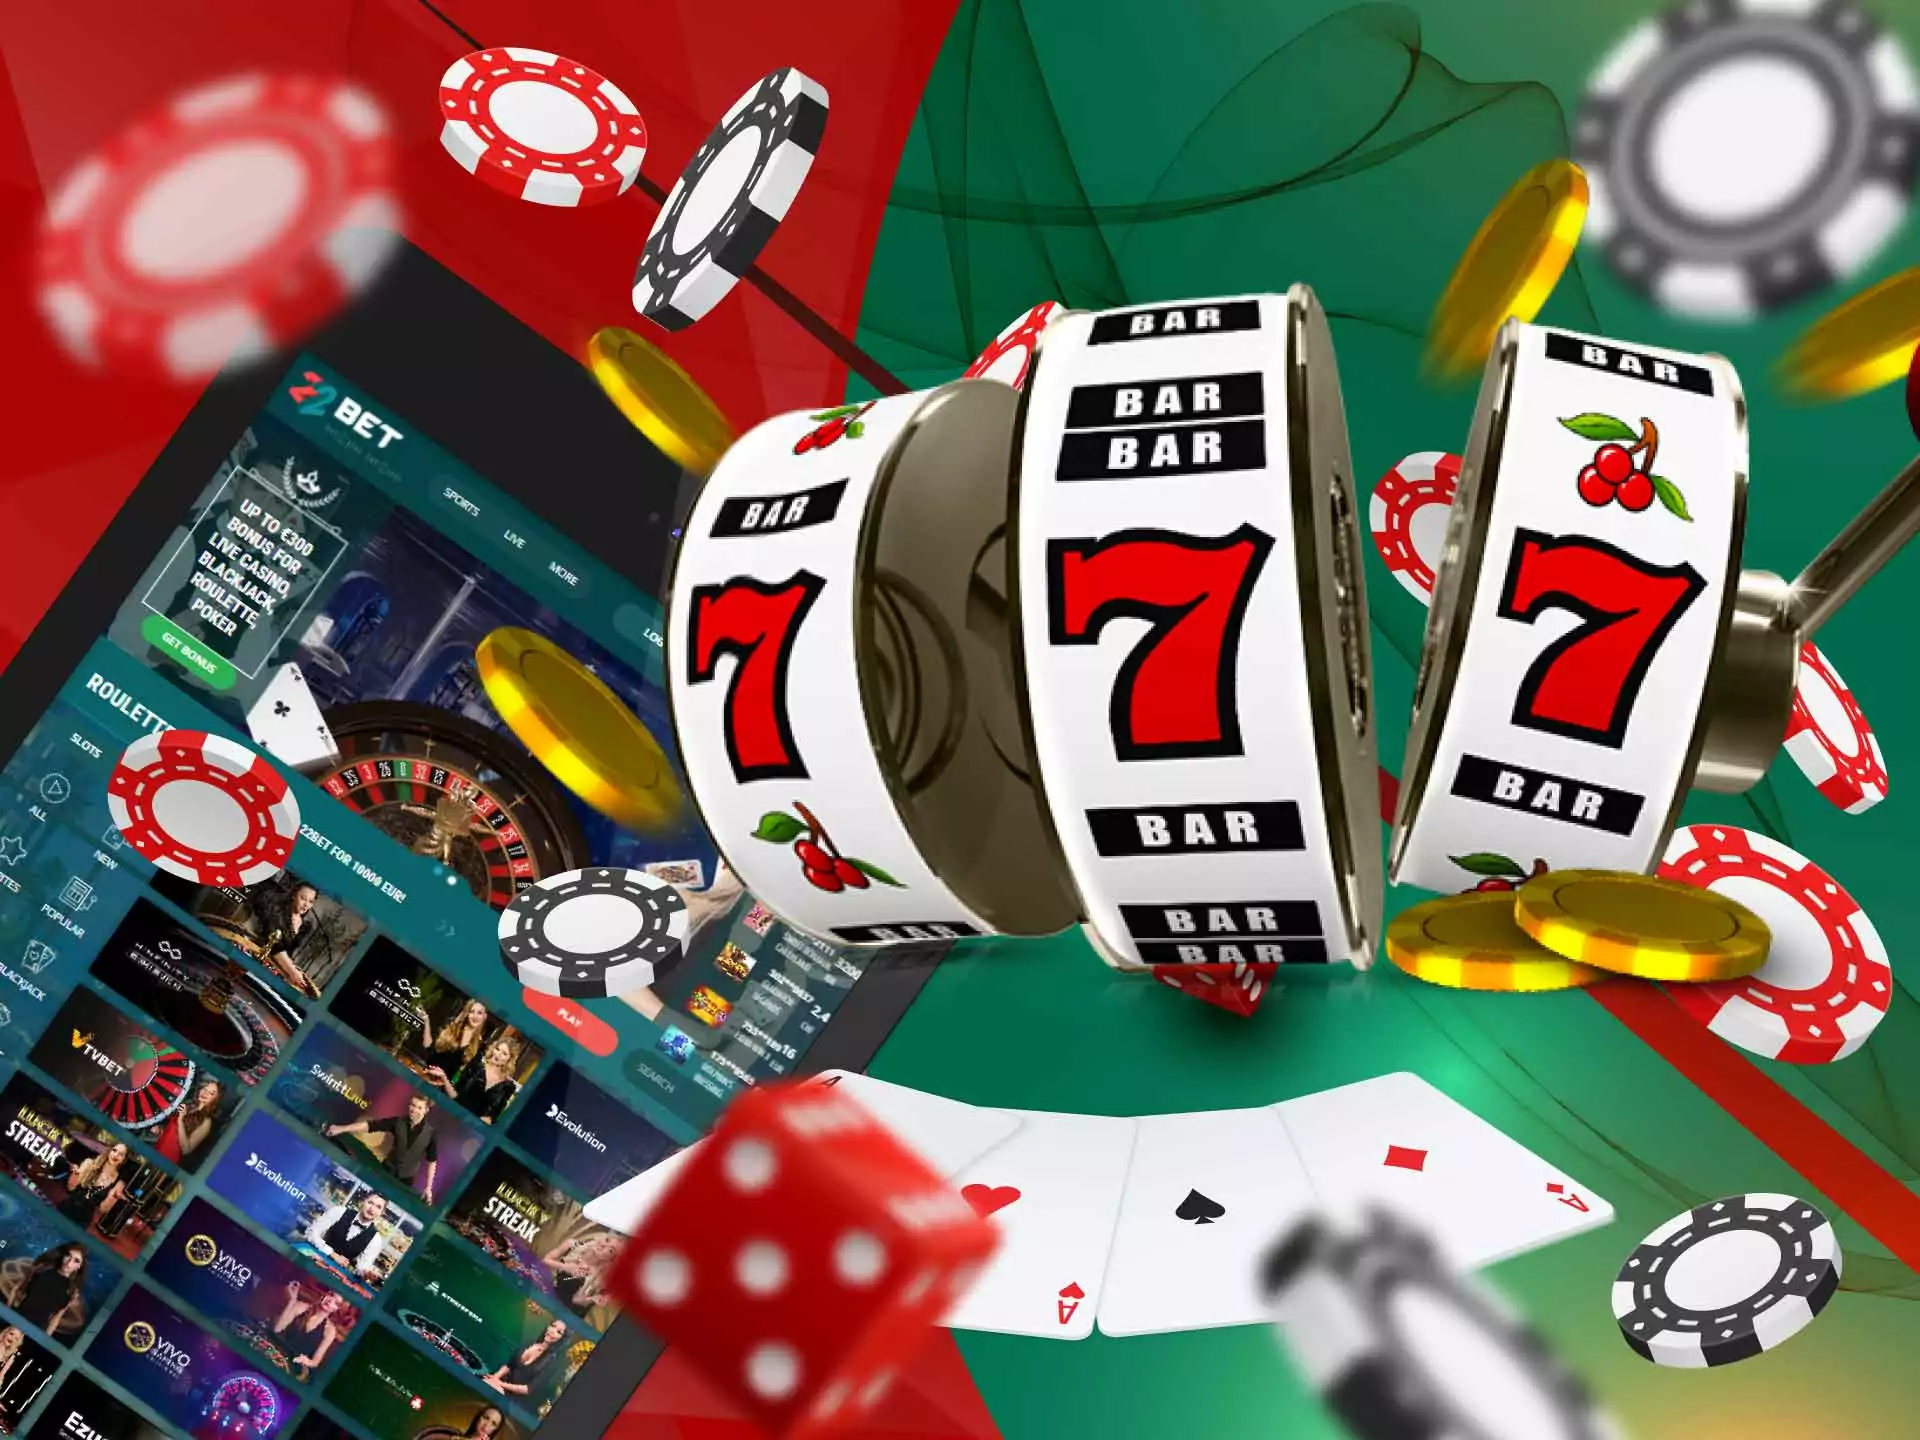 The jackpot games can give you a chance to win a big jackpot at 22Bet.